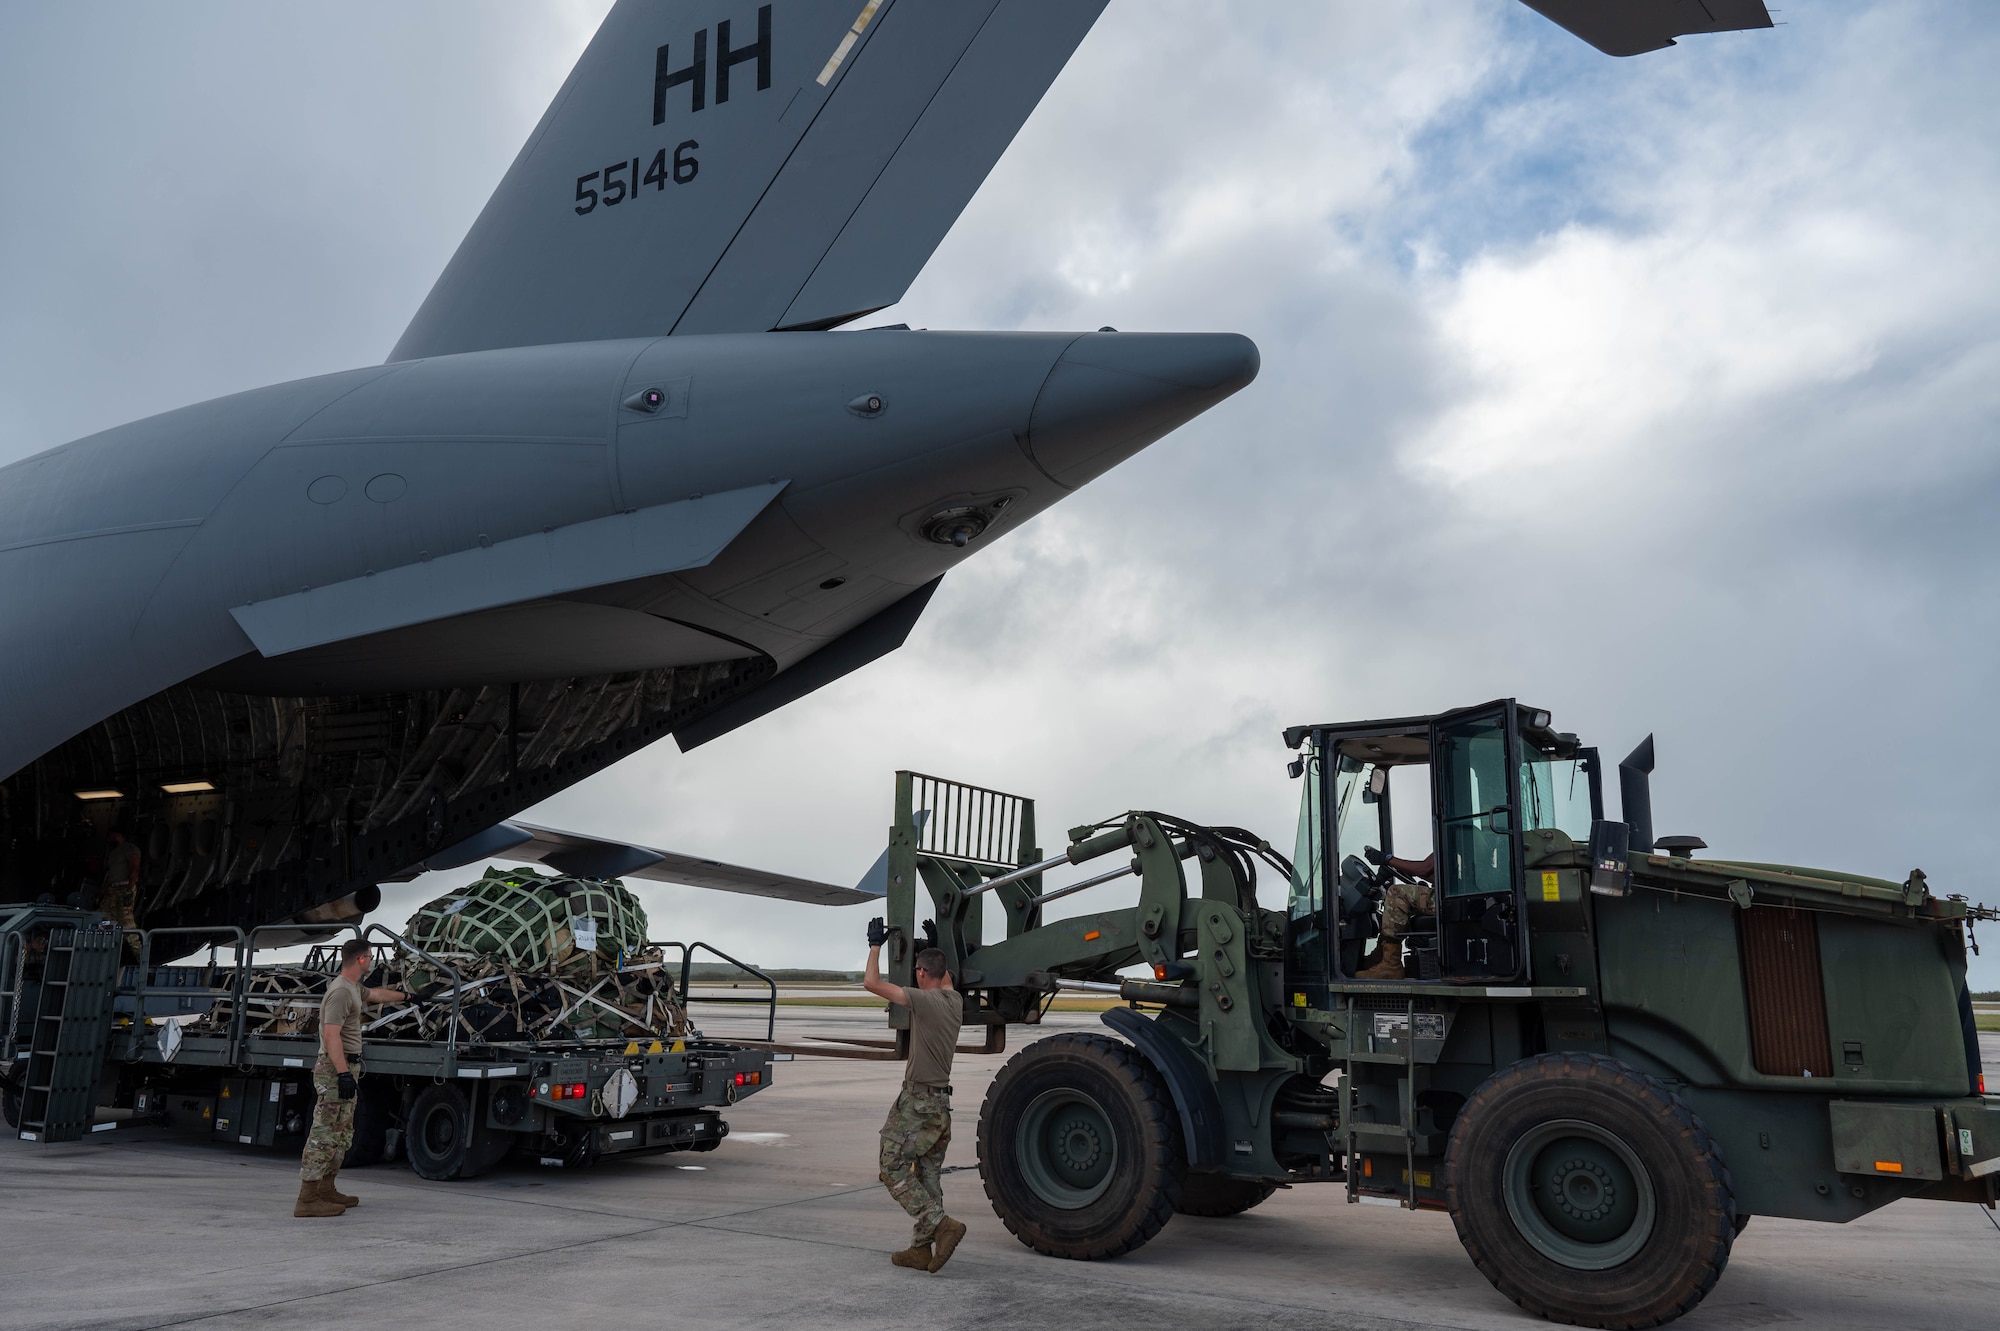 The Air Transportation team with the 647th Logistics Readiness Squadron, operates a Forklift to unload cargo from the back of a C-17 Globemaster III during Exercise Agile Reaper 24-1, 6 April, 2024. Approximately 250 personnel from three locations traveled to participate in training within an environment where they can operate at the level of stress that will increase responsiveness to natural disasters and other challenges to better support the Pacific. (Photo by U.S. Air Force Technical Sgt. Tarelle Walker)